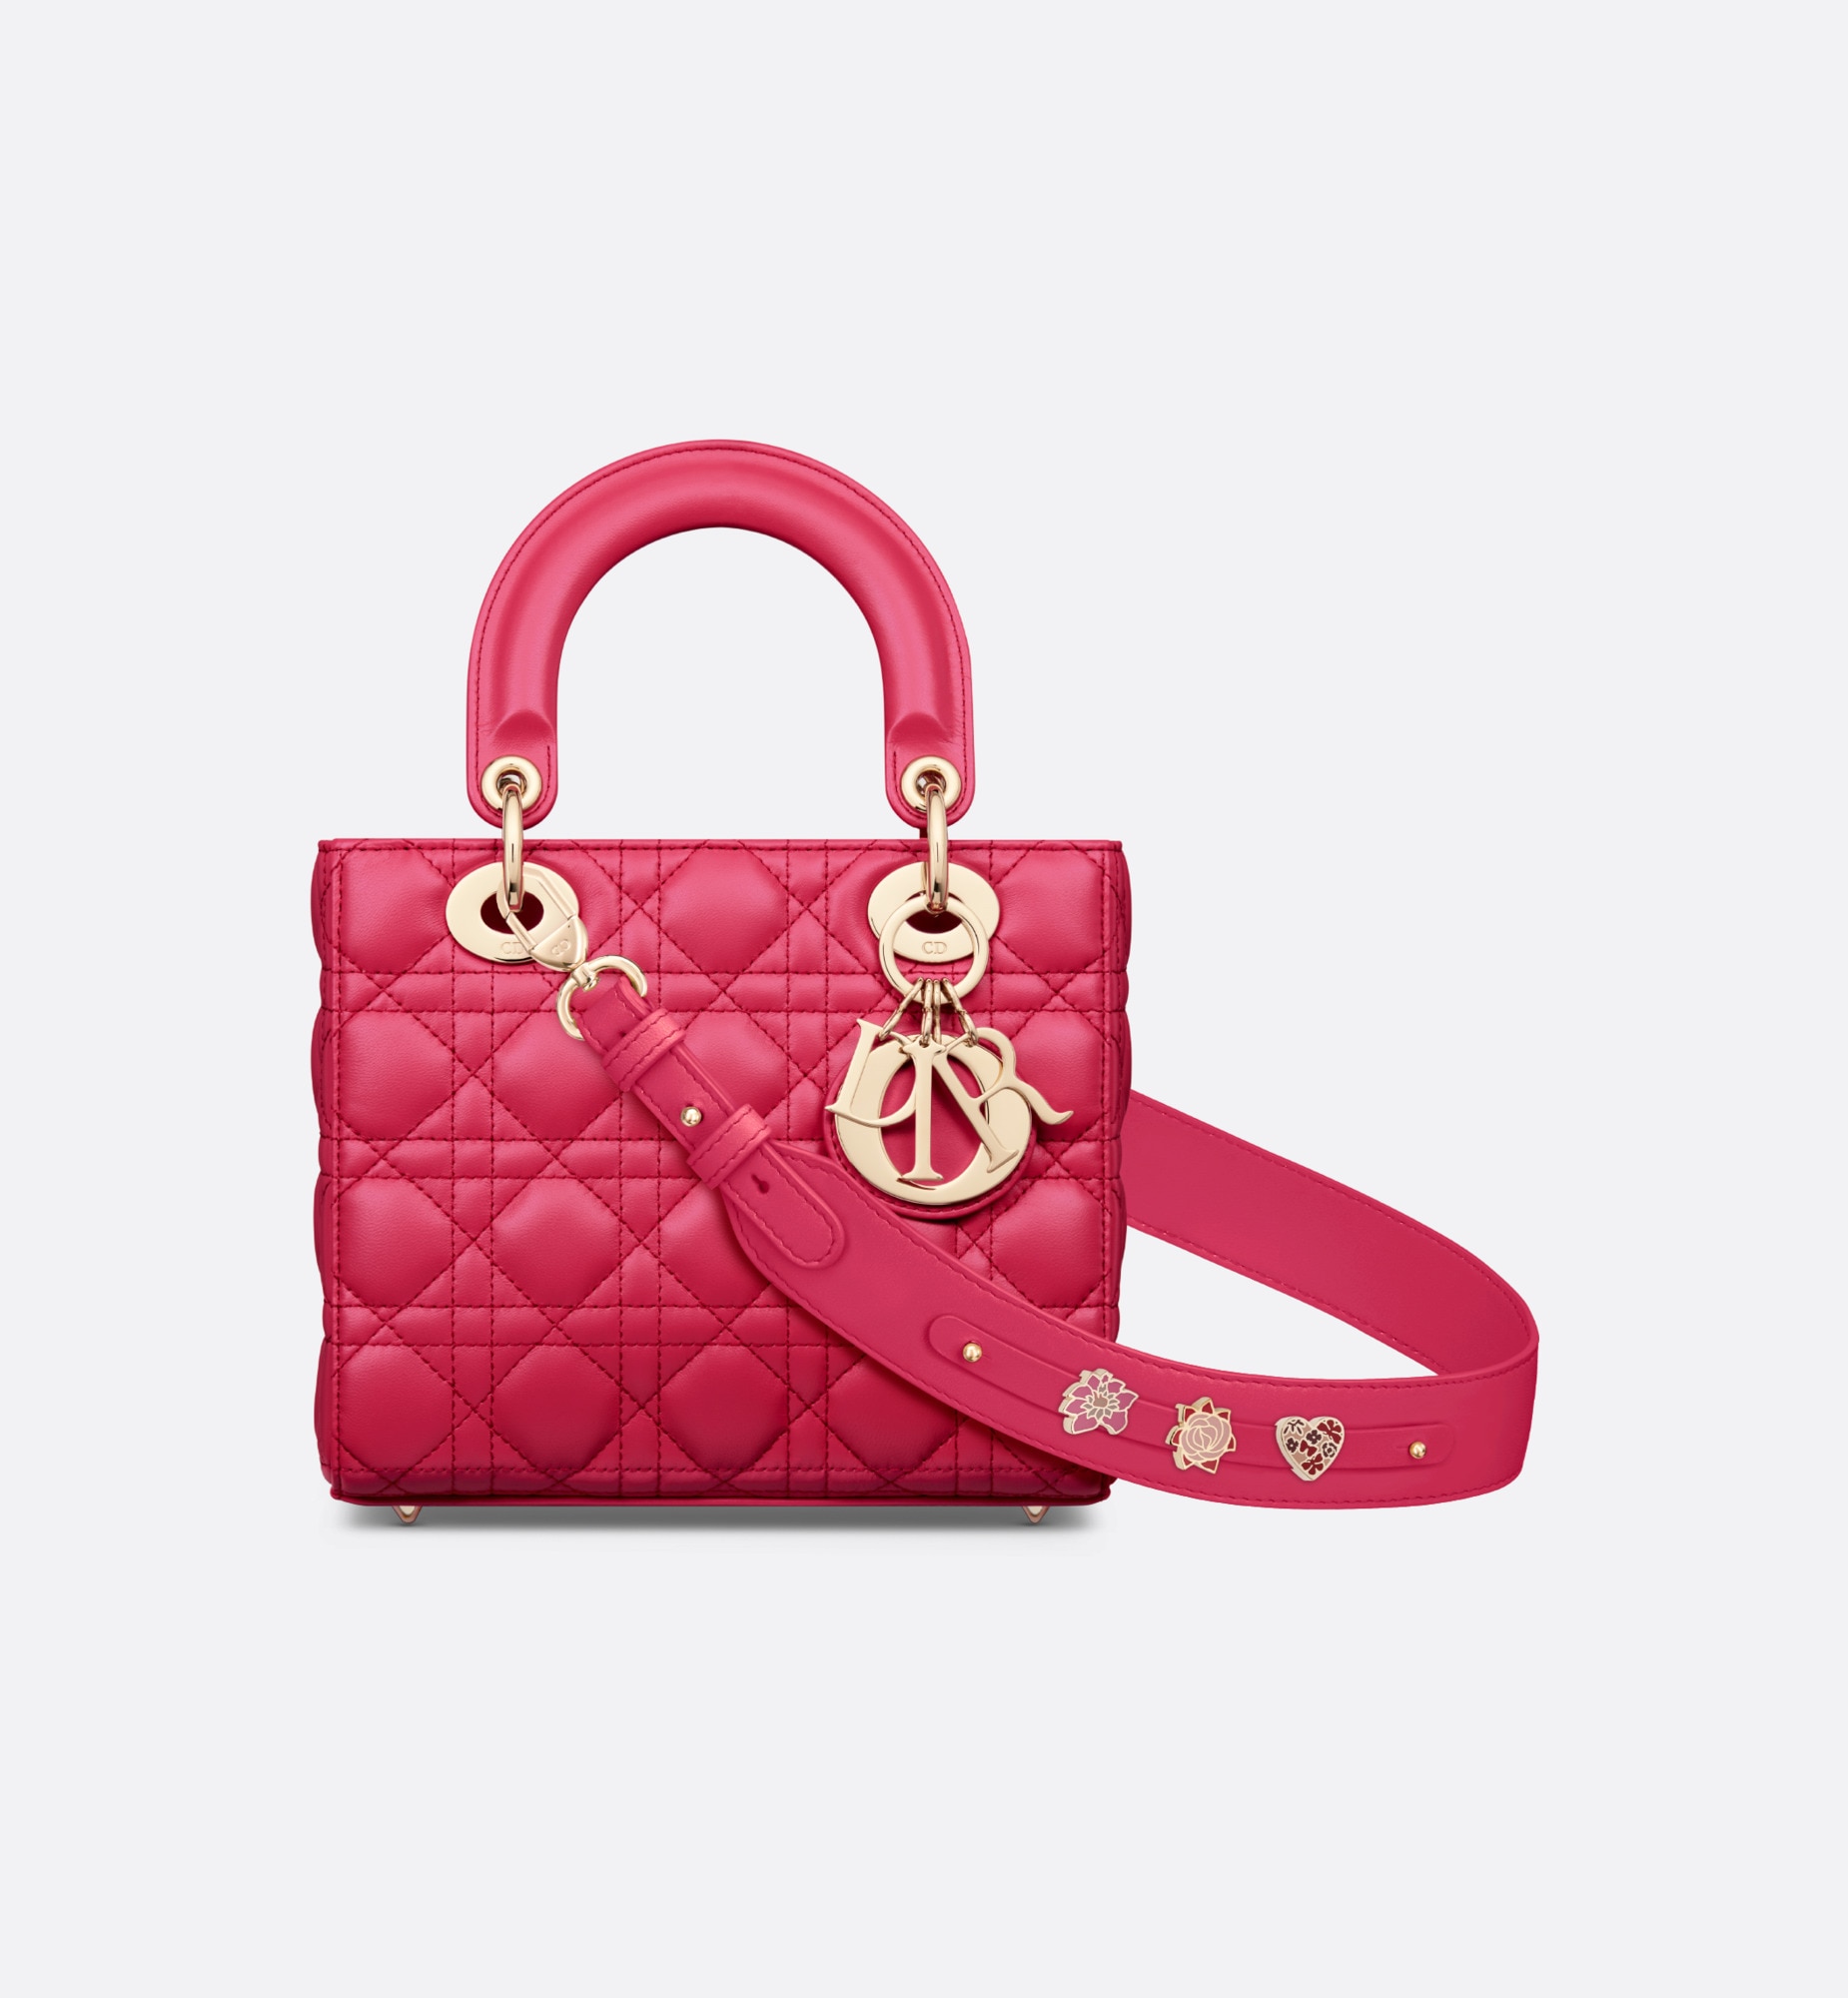 Small Lady Dior bag in pink